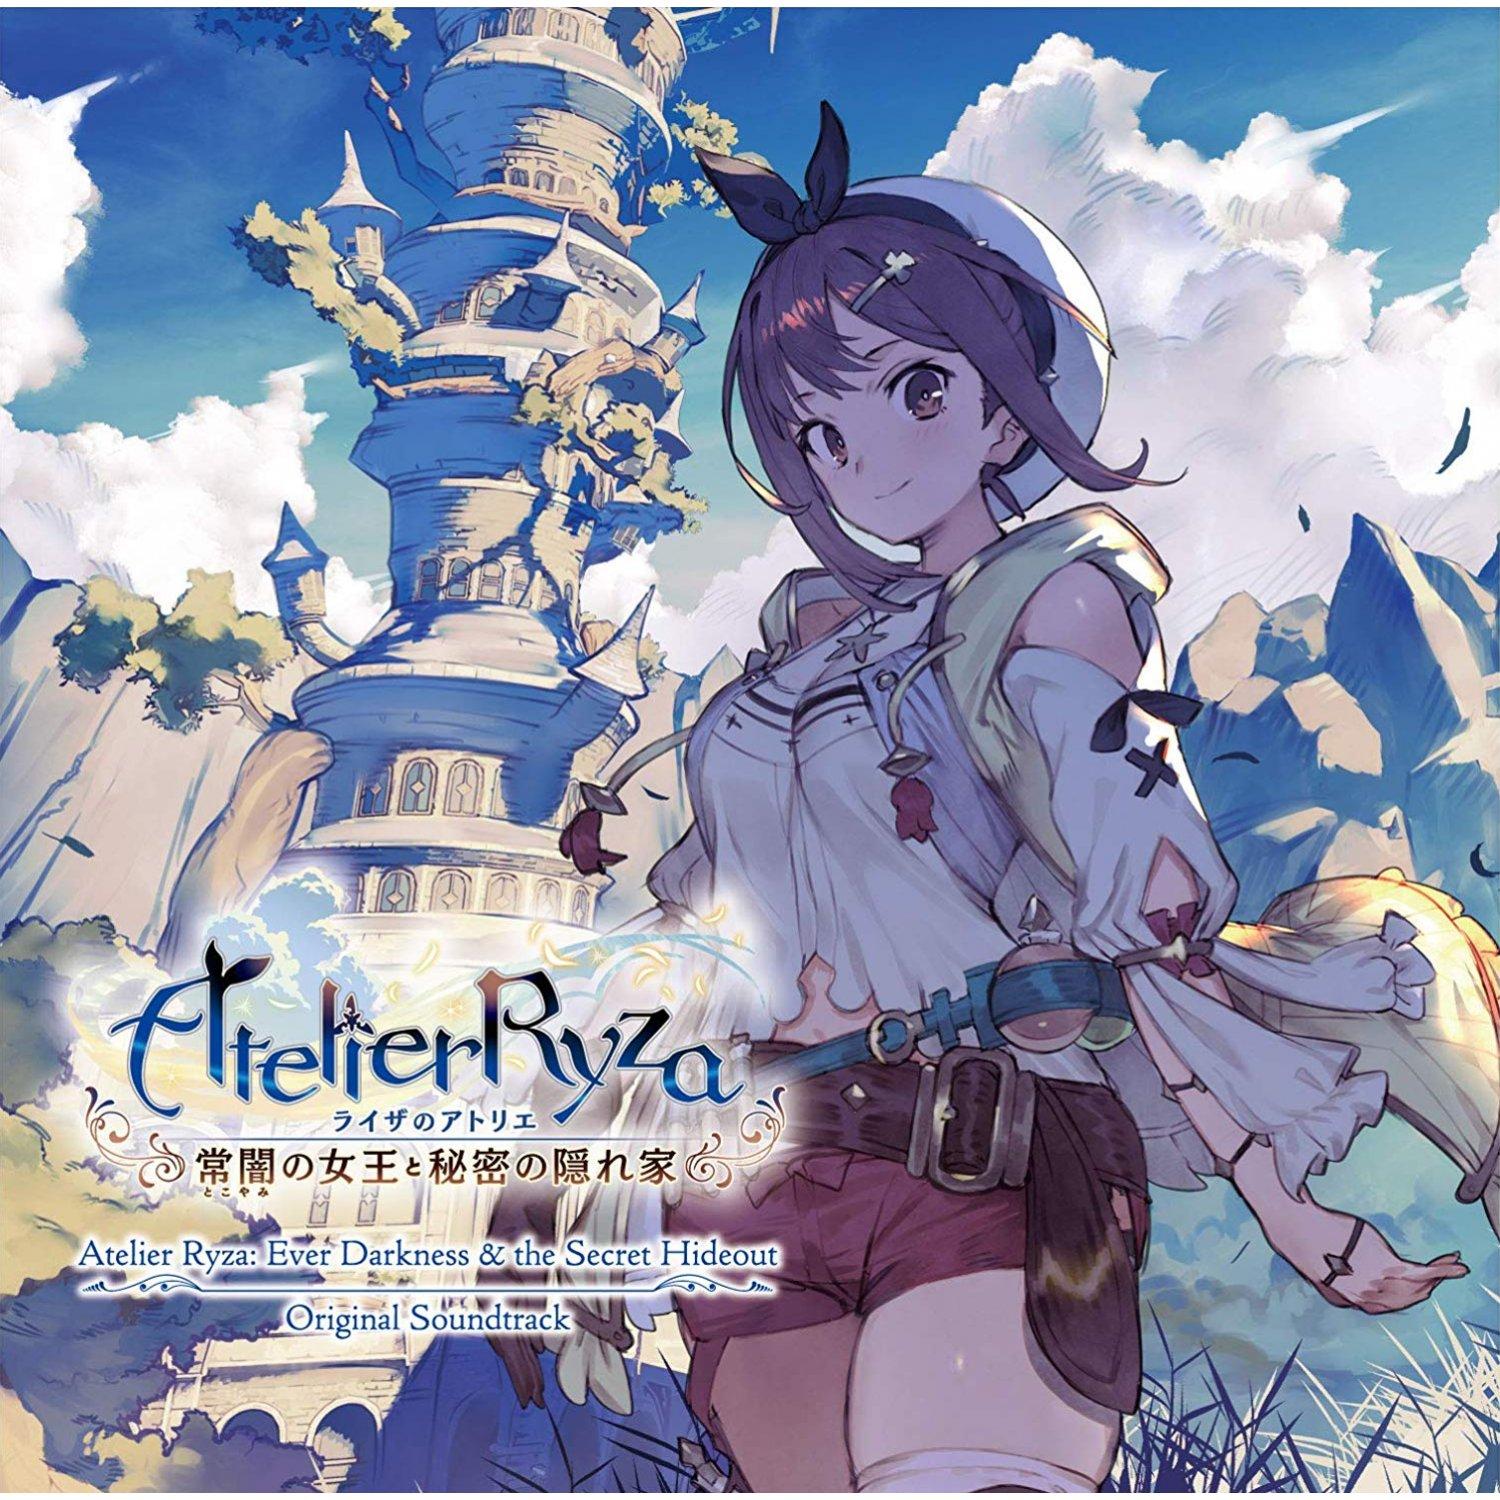 Atelier Ryza: Ever Darkness And The Secret Hideout Original Soundtrack